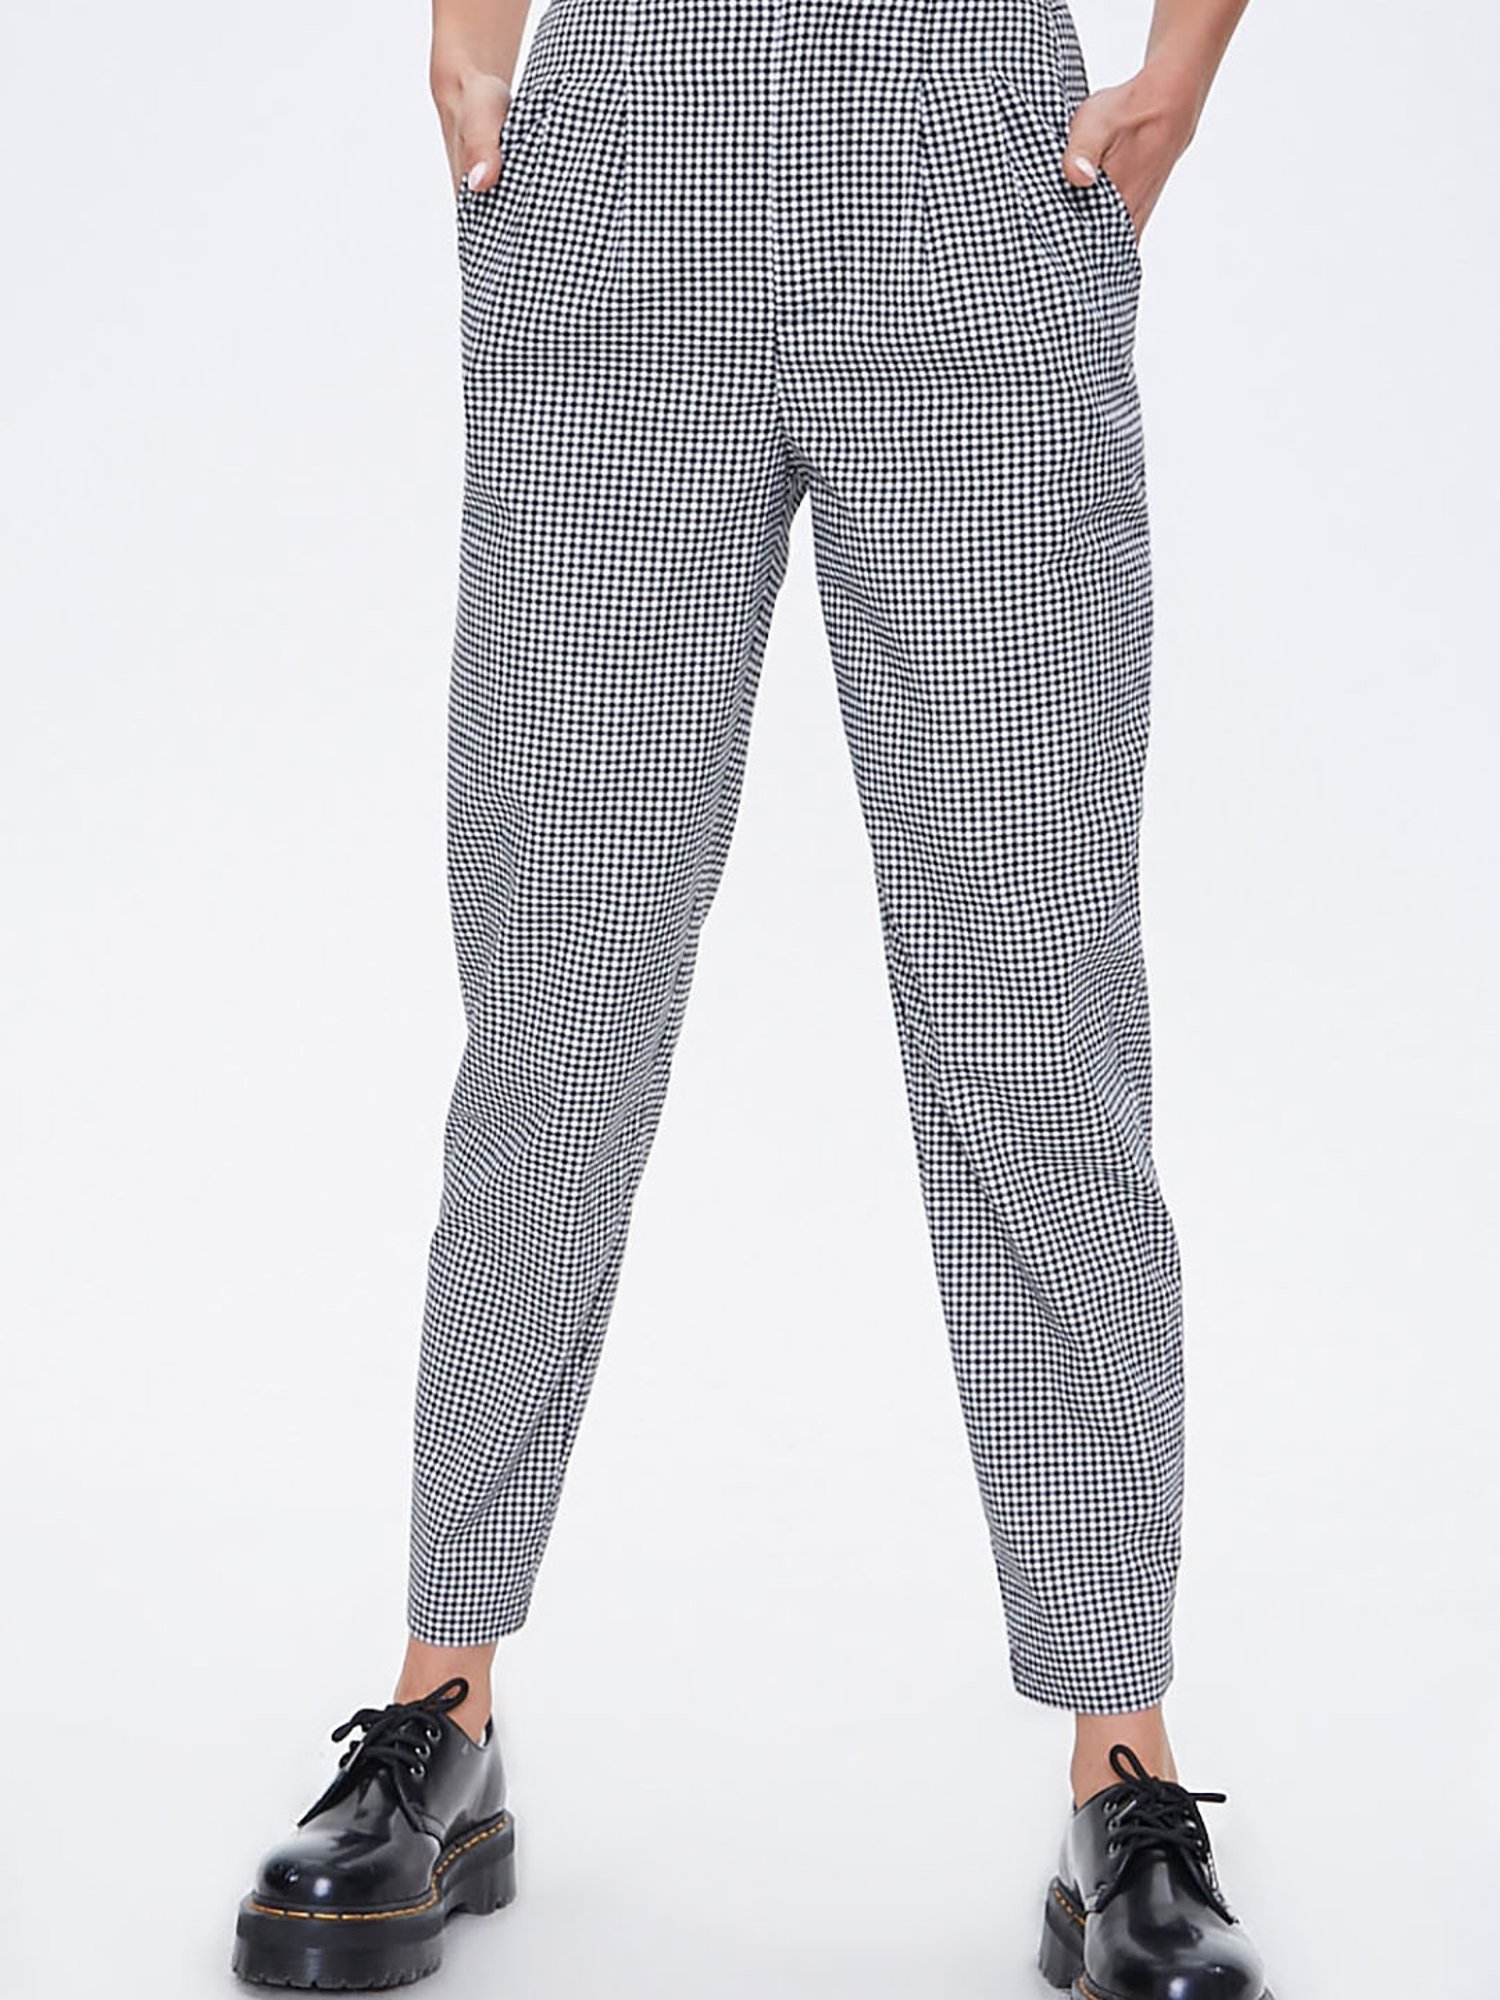 SweatyRocks Women's High Waisted Plaid Straight Leg Cropped Pants Gingham  Trousers with Pockets Black White XS at Amazon Women's Clothing store